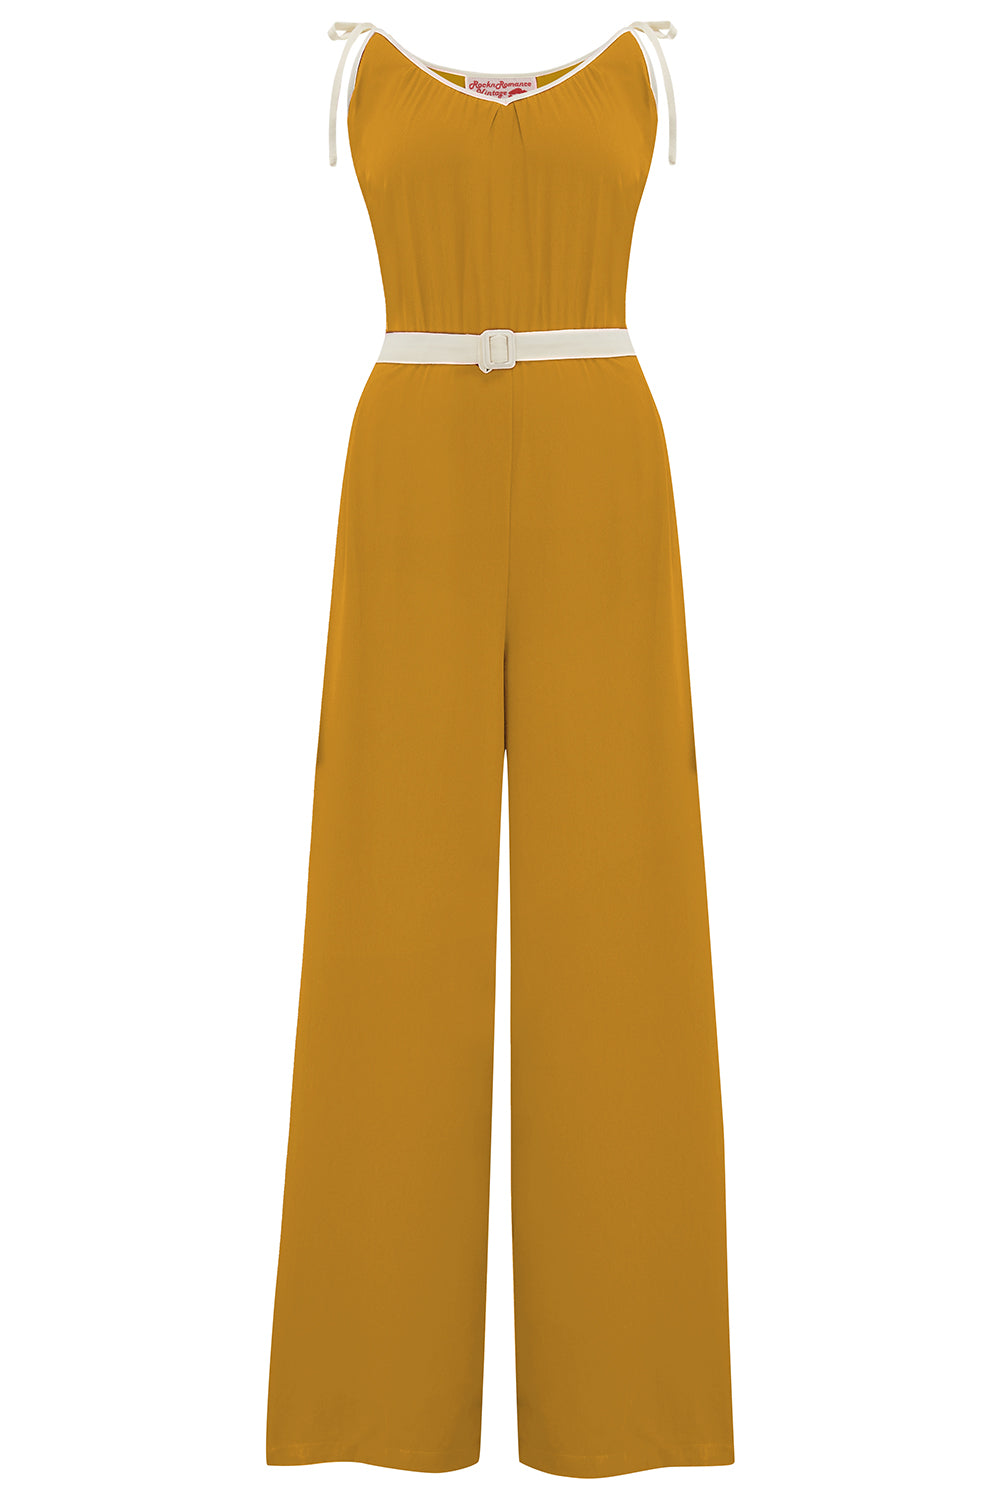 1950s Pants, Jeans, Jumpsuits- High Waist, Wide Leg, Capri, Pedal Pushers The Marcie Jump Suit in Mustard With Ivory Contrasts True  Authentic 1950s Vintage Style £49.00 AT vintagedancer.com